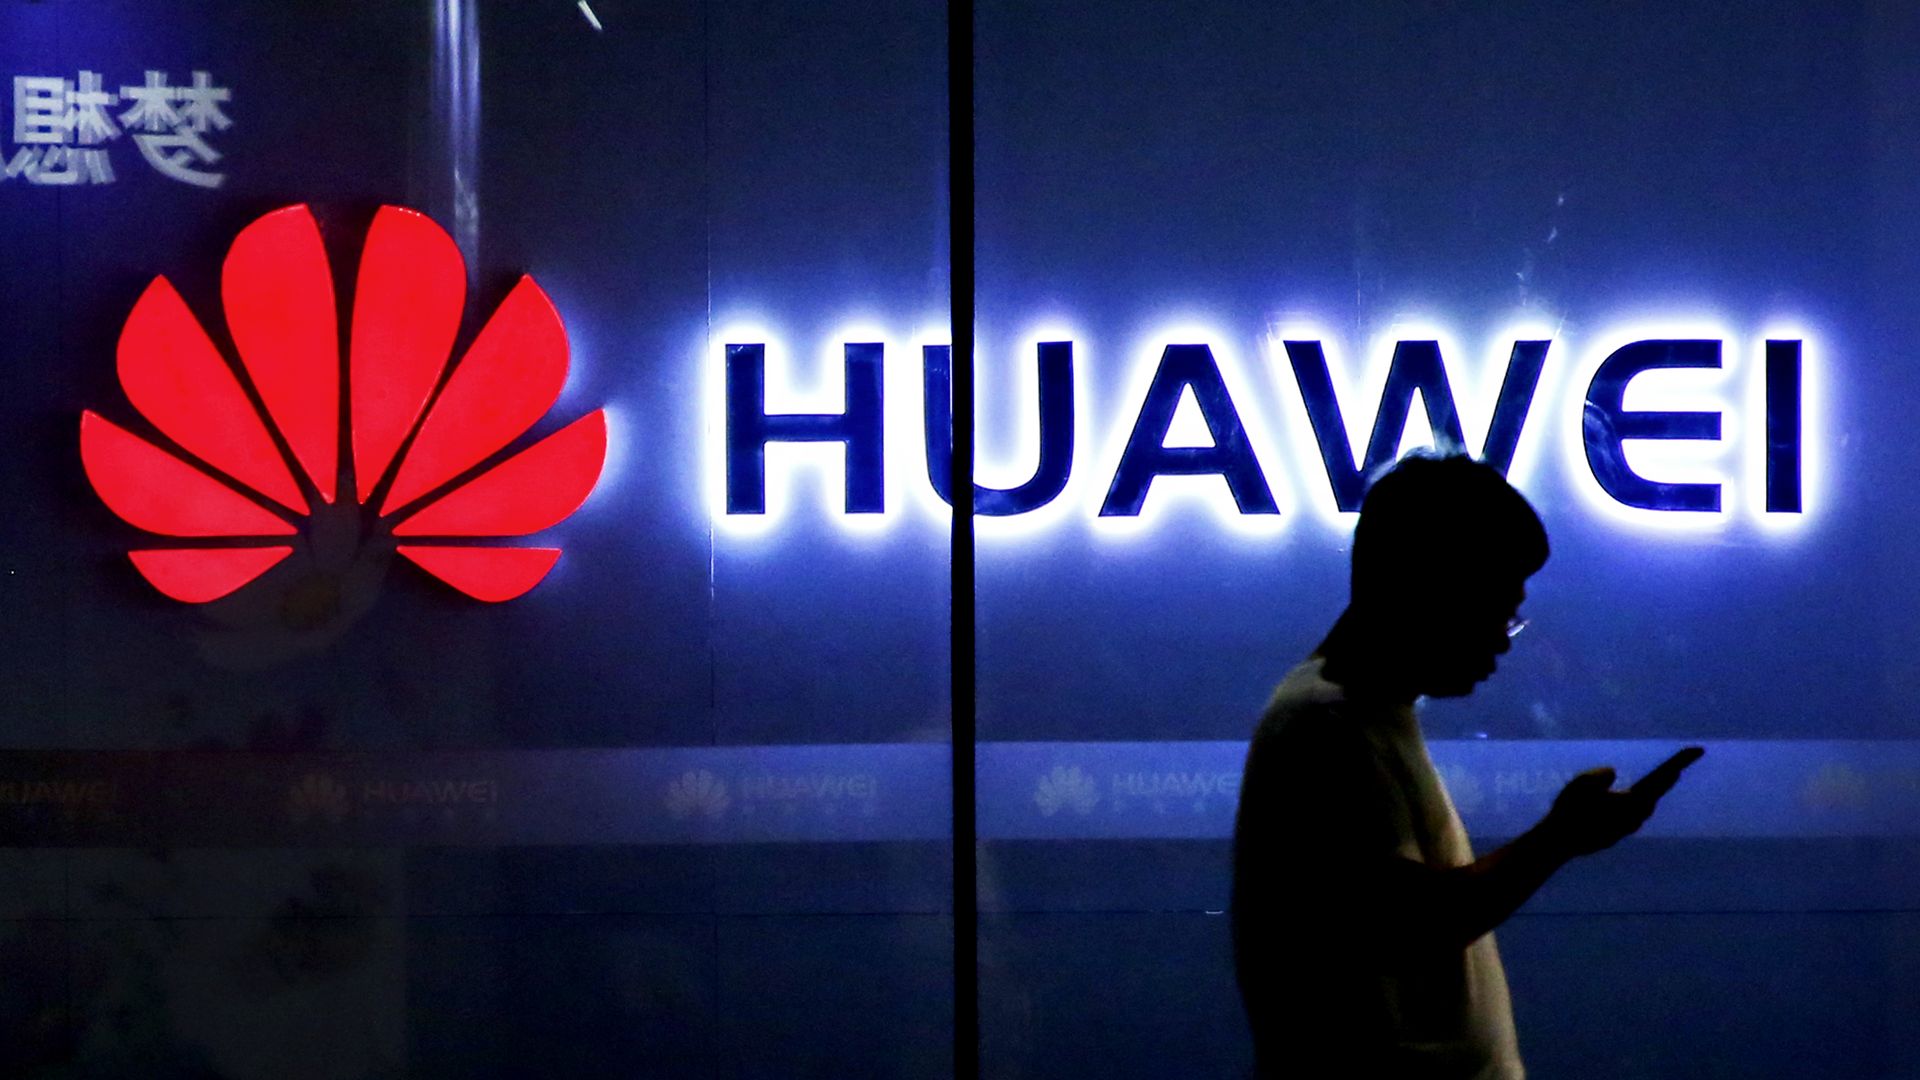 Photo of man using a smartphone silhouetted against a glowing Huawei logo